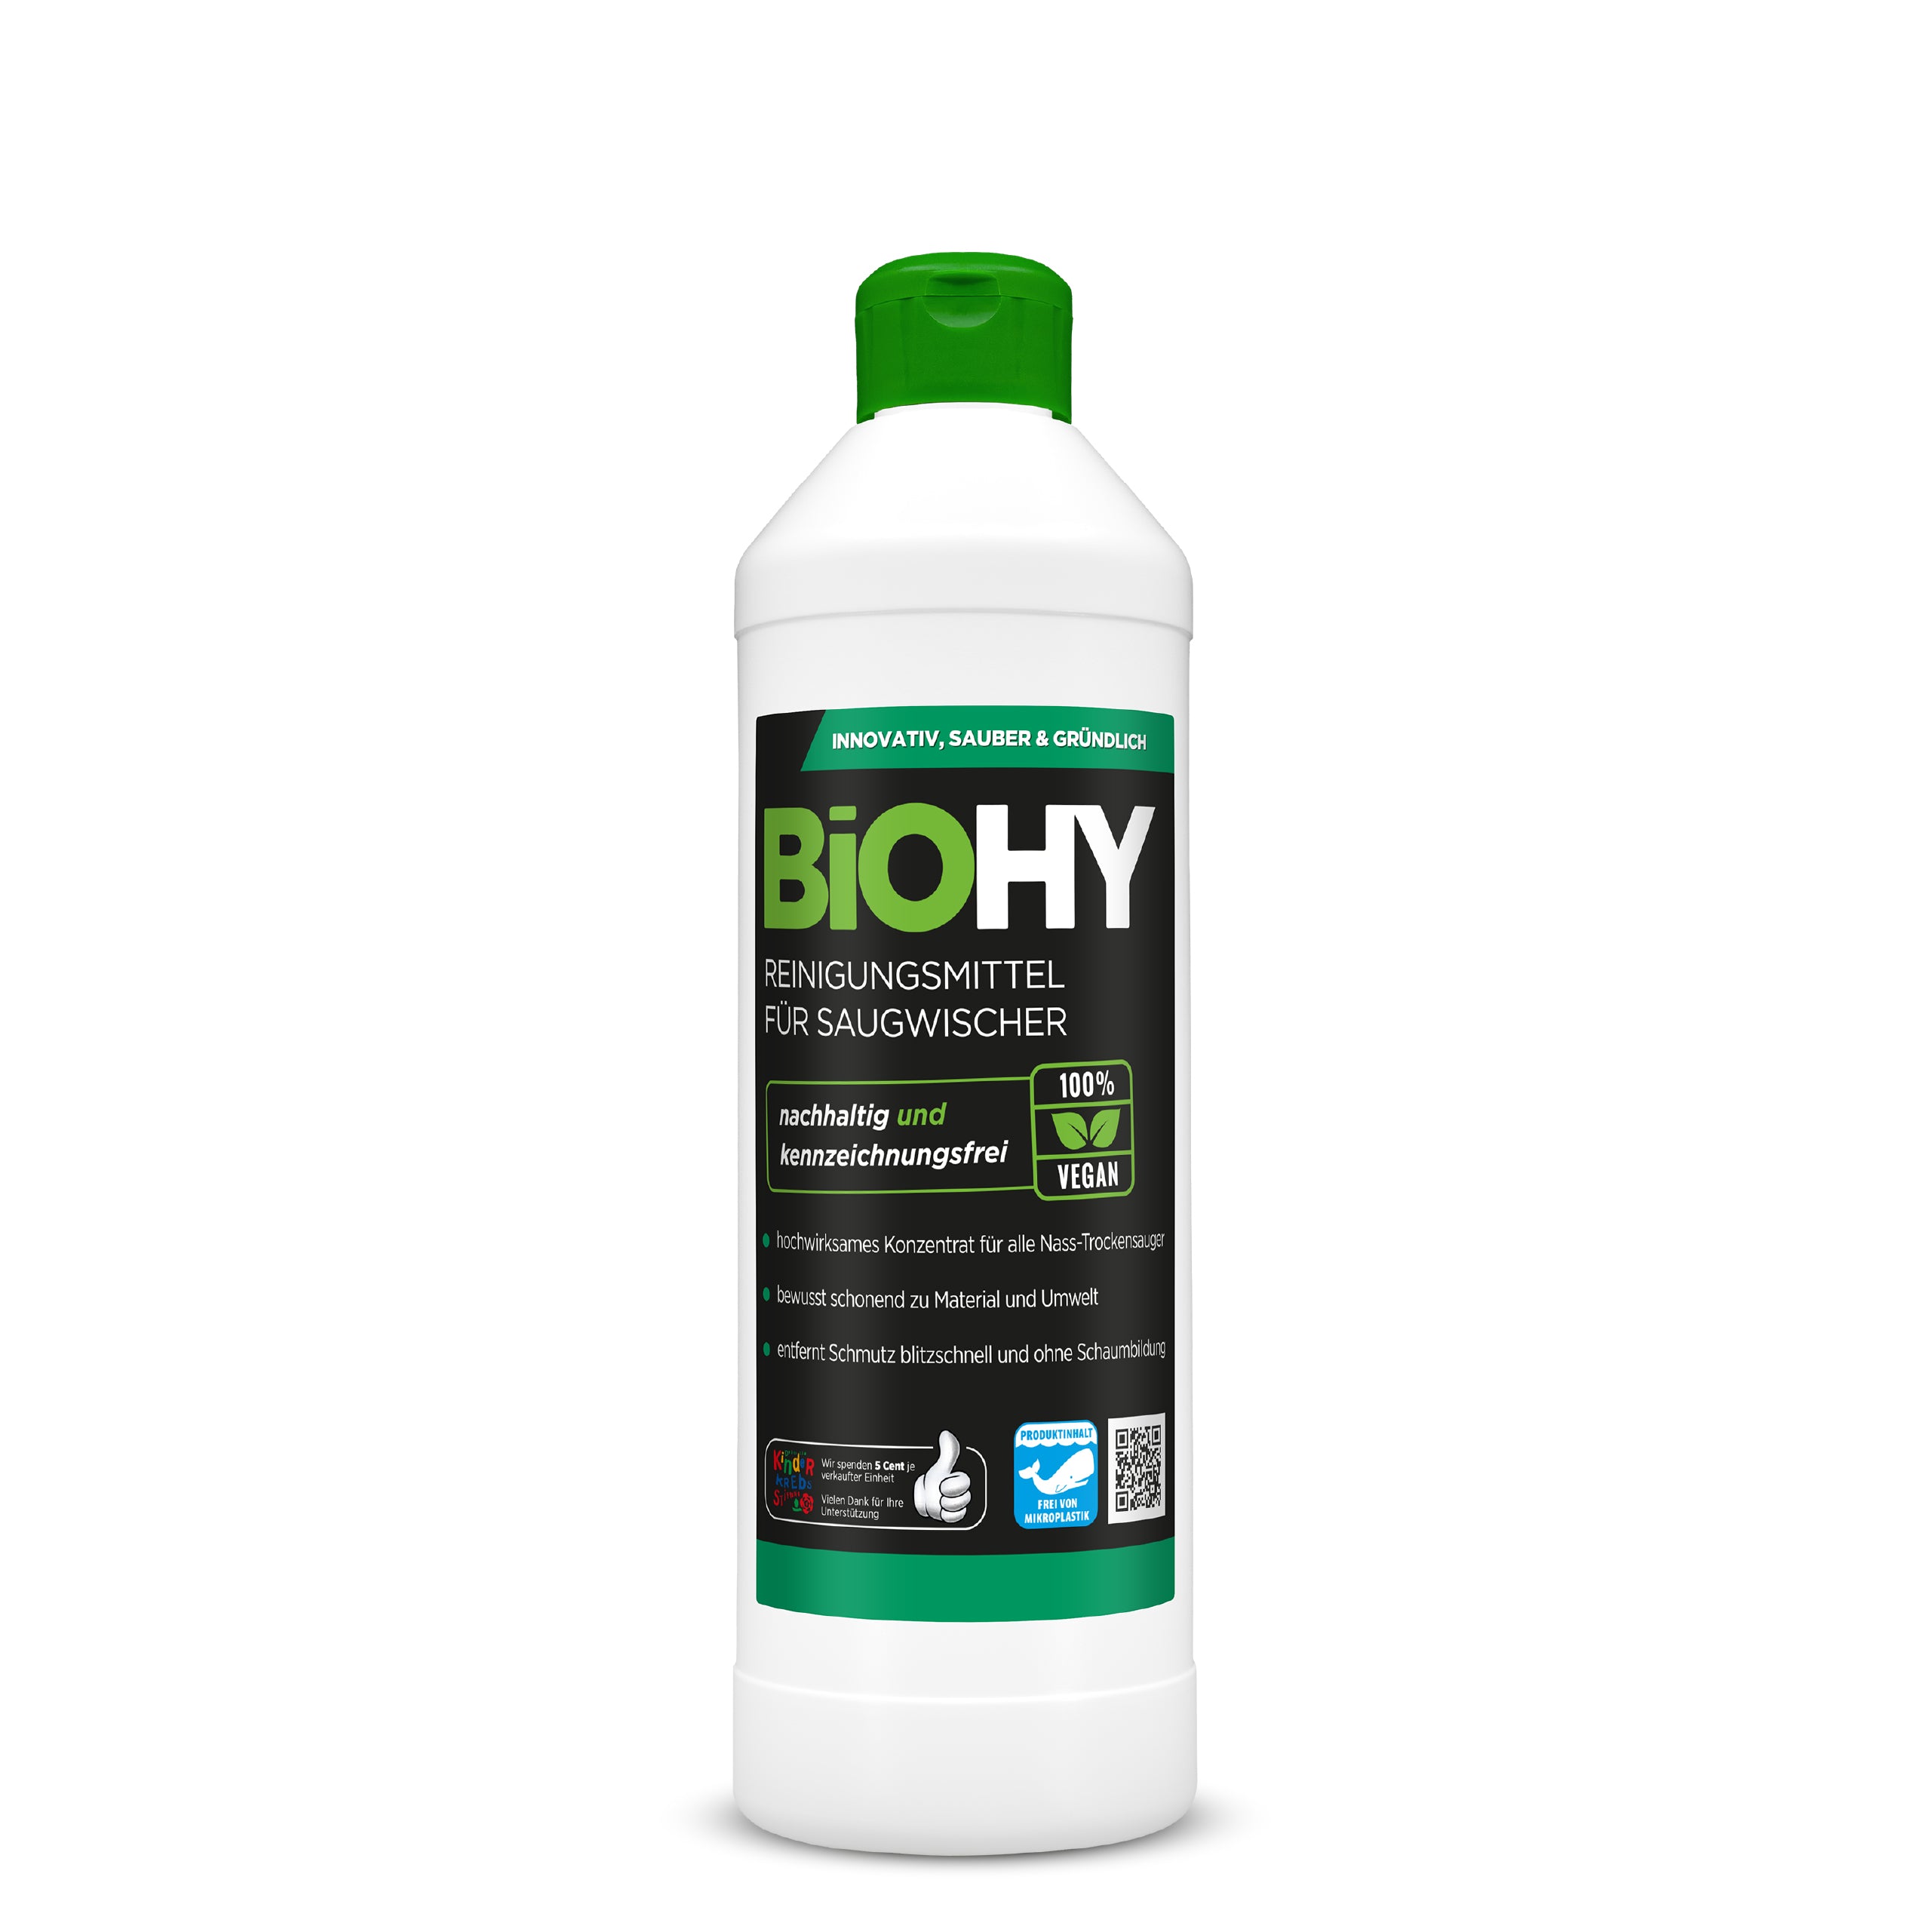 BiOHY cleaning agent for vacuum wipers, cleaners for wet and dry vacuum cleaners, floor care products, organic cleaners